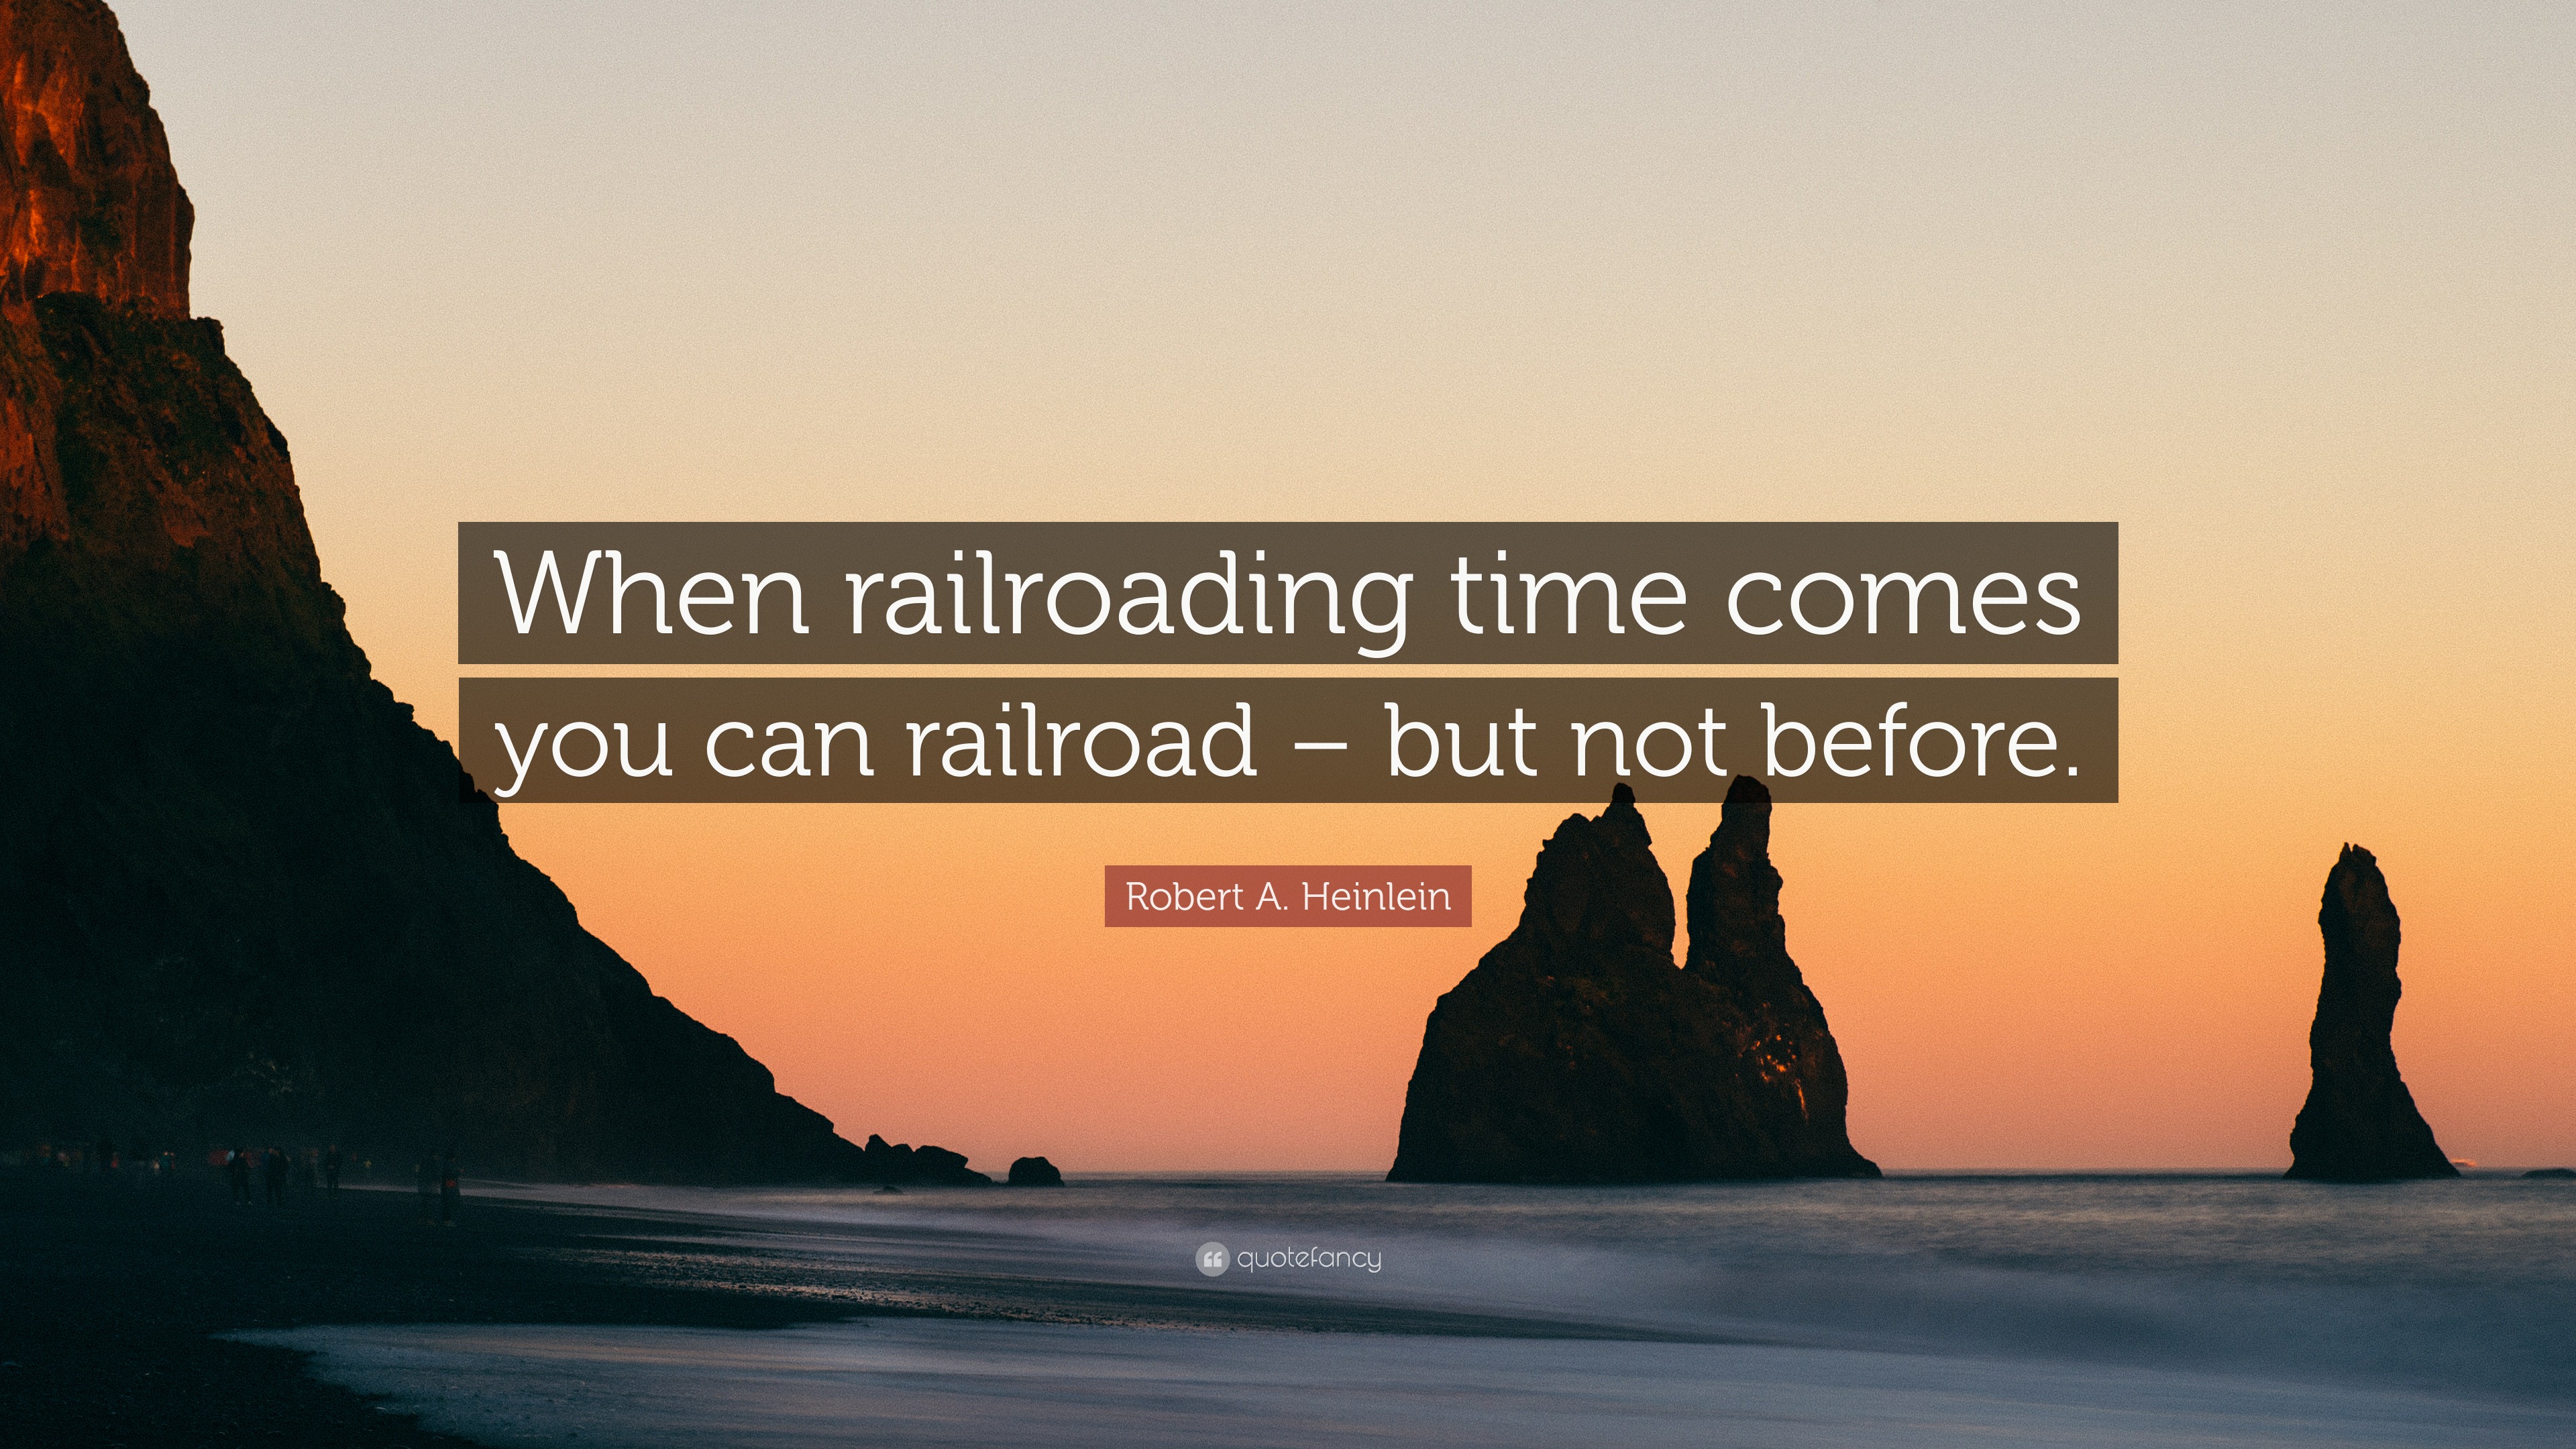 Robert A. Heinlein Quote: “When railroading time comes you can railroad –  but not before.”